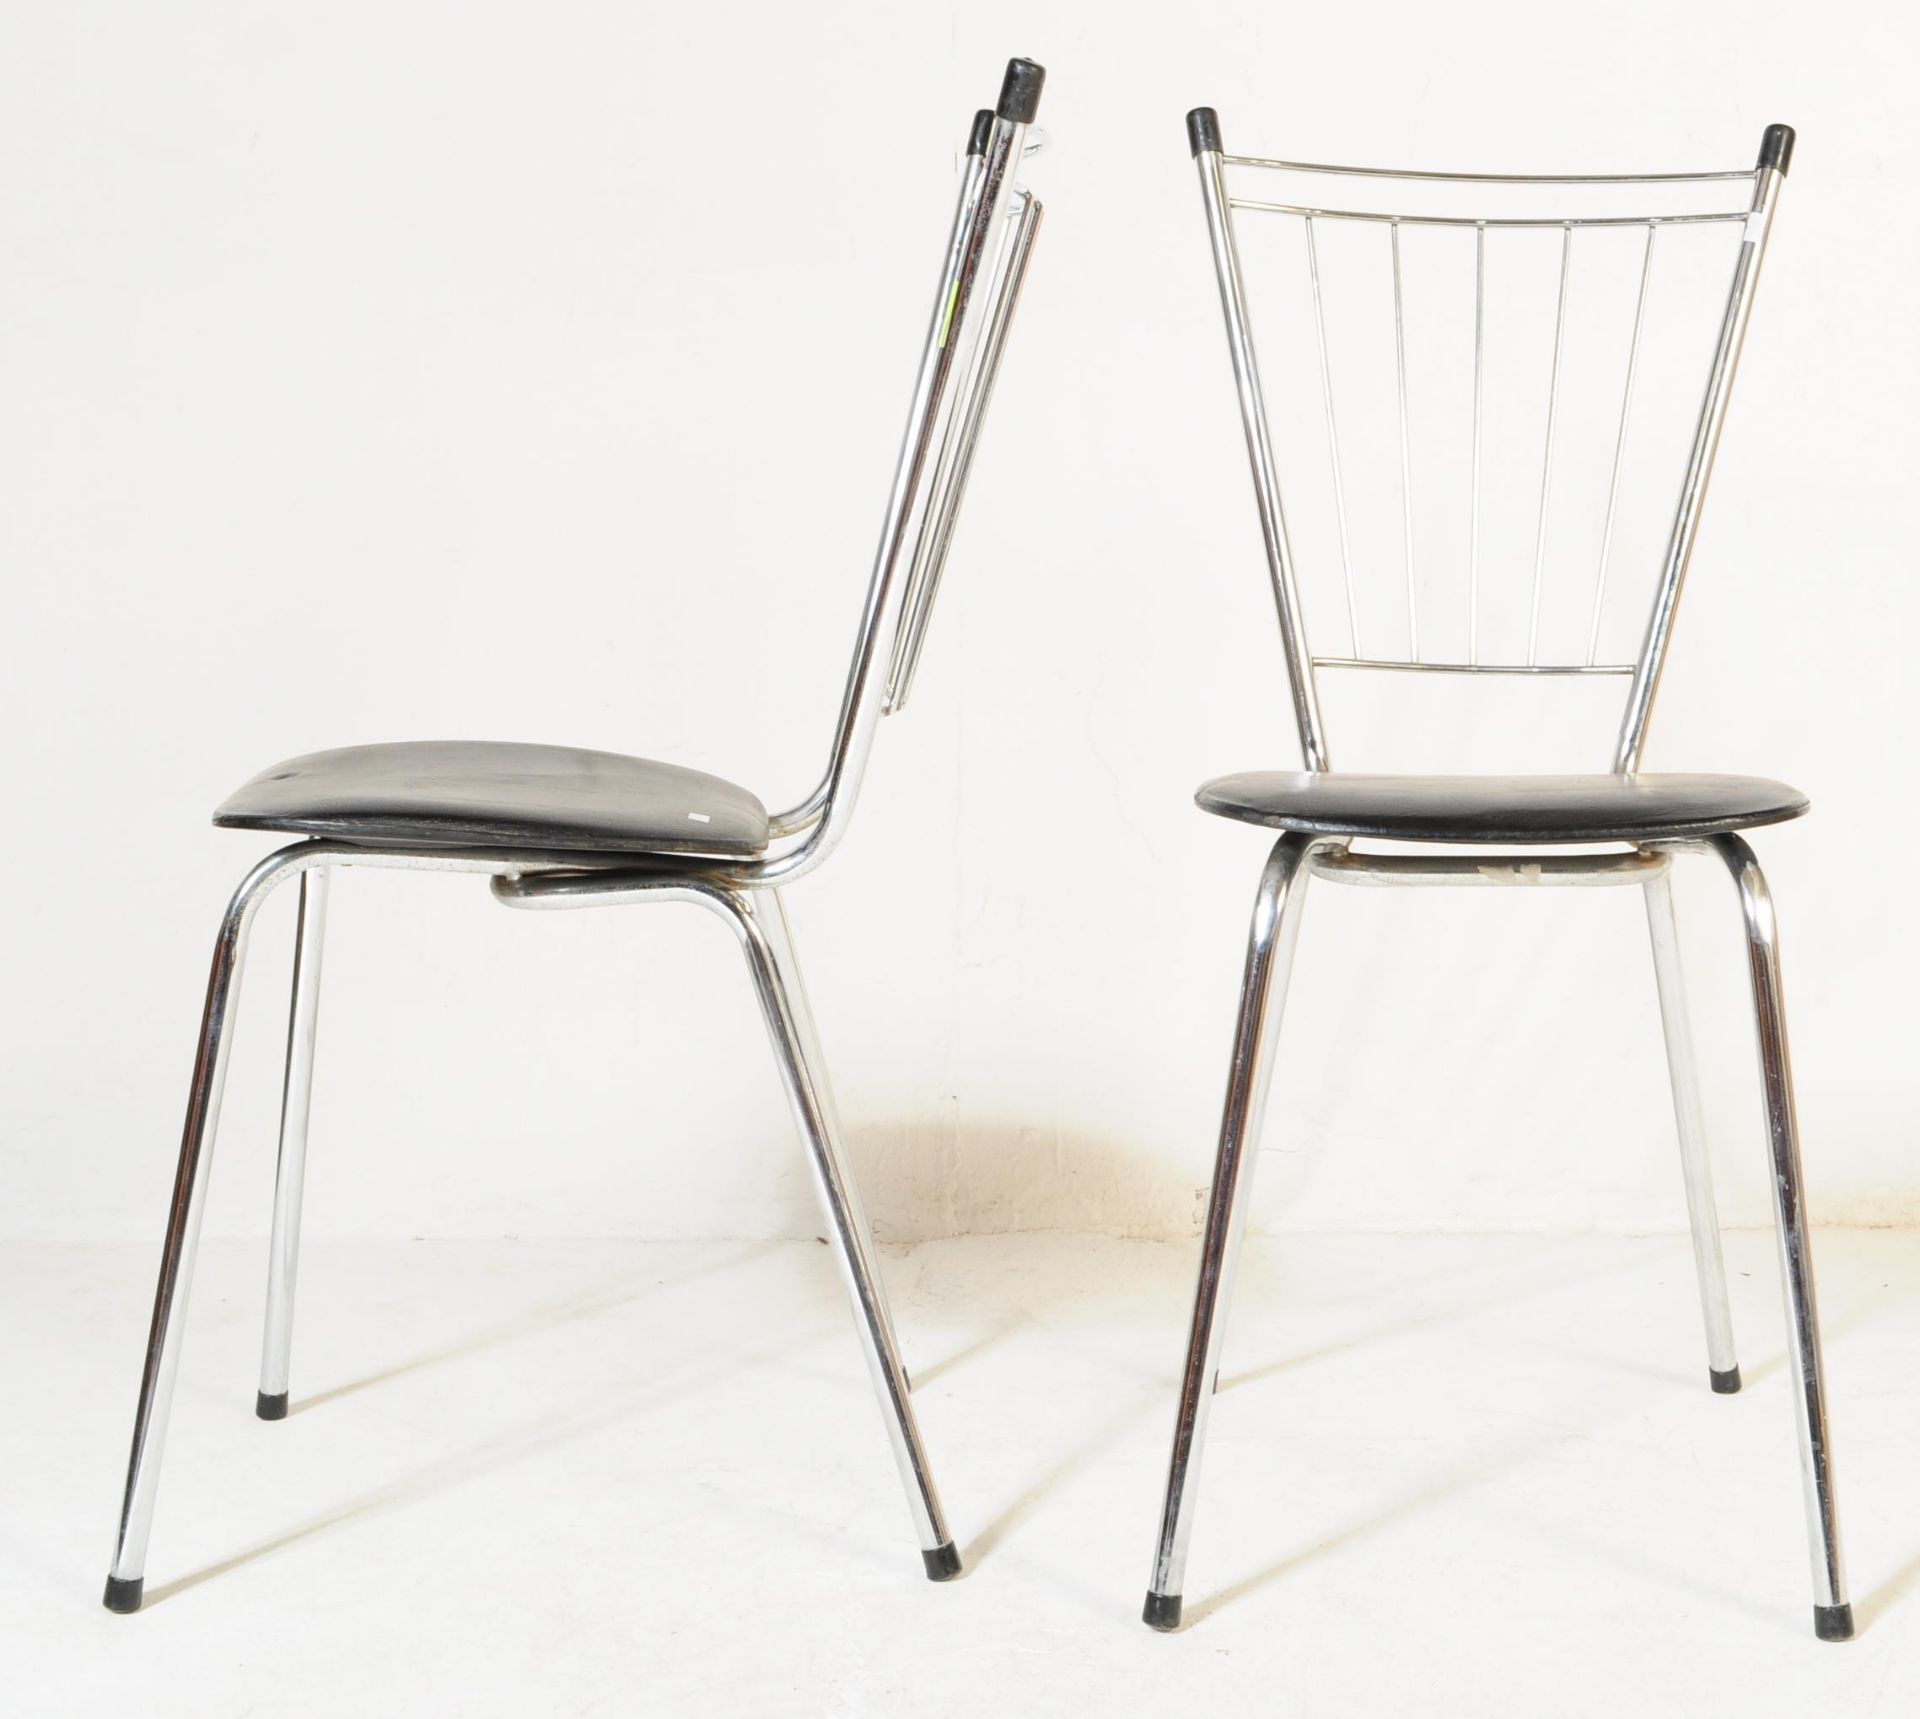 A PAIR OF SOUDEX FRENCH 1960'S CHROME & VINYL CHAIRS - Image 3 of 5